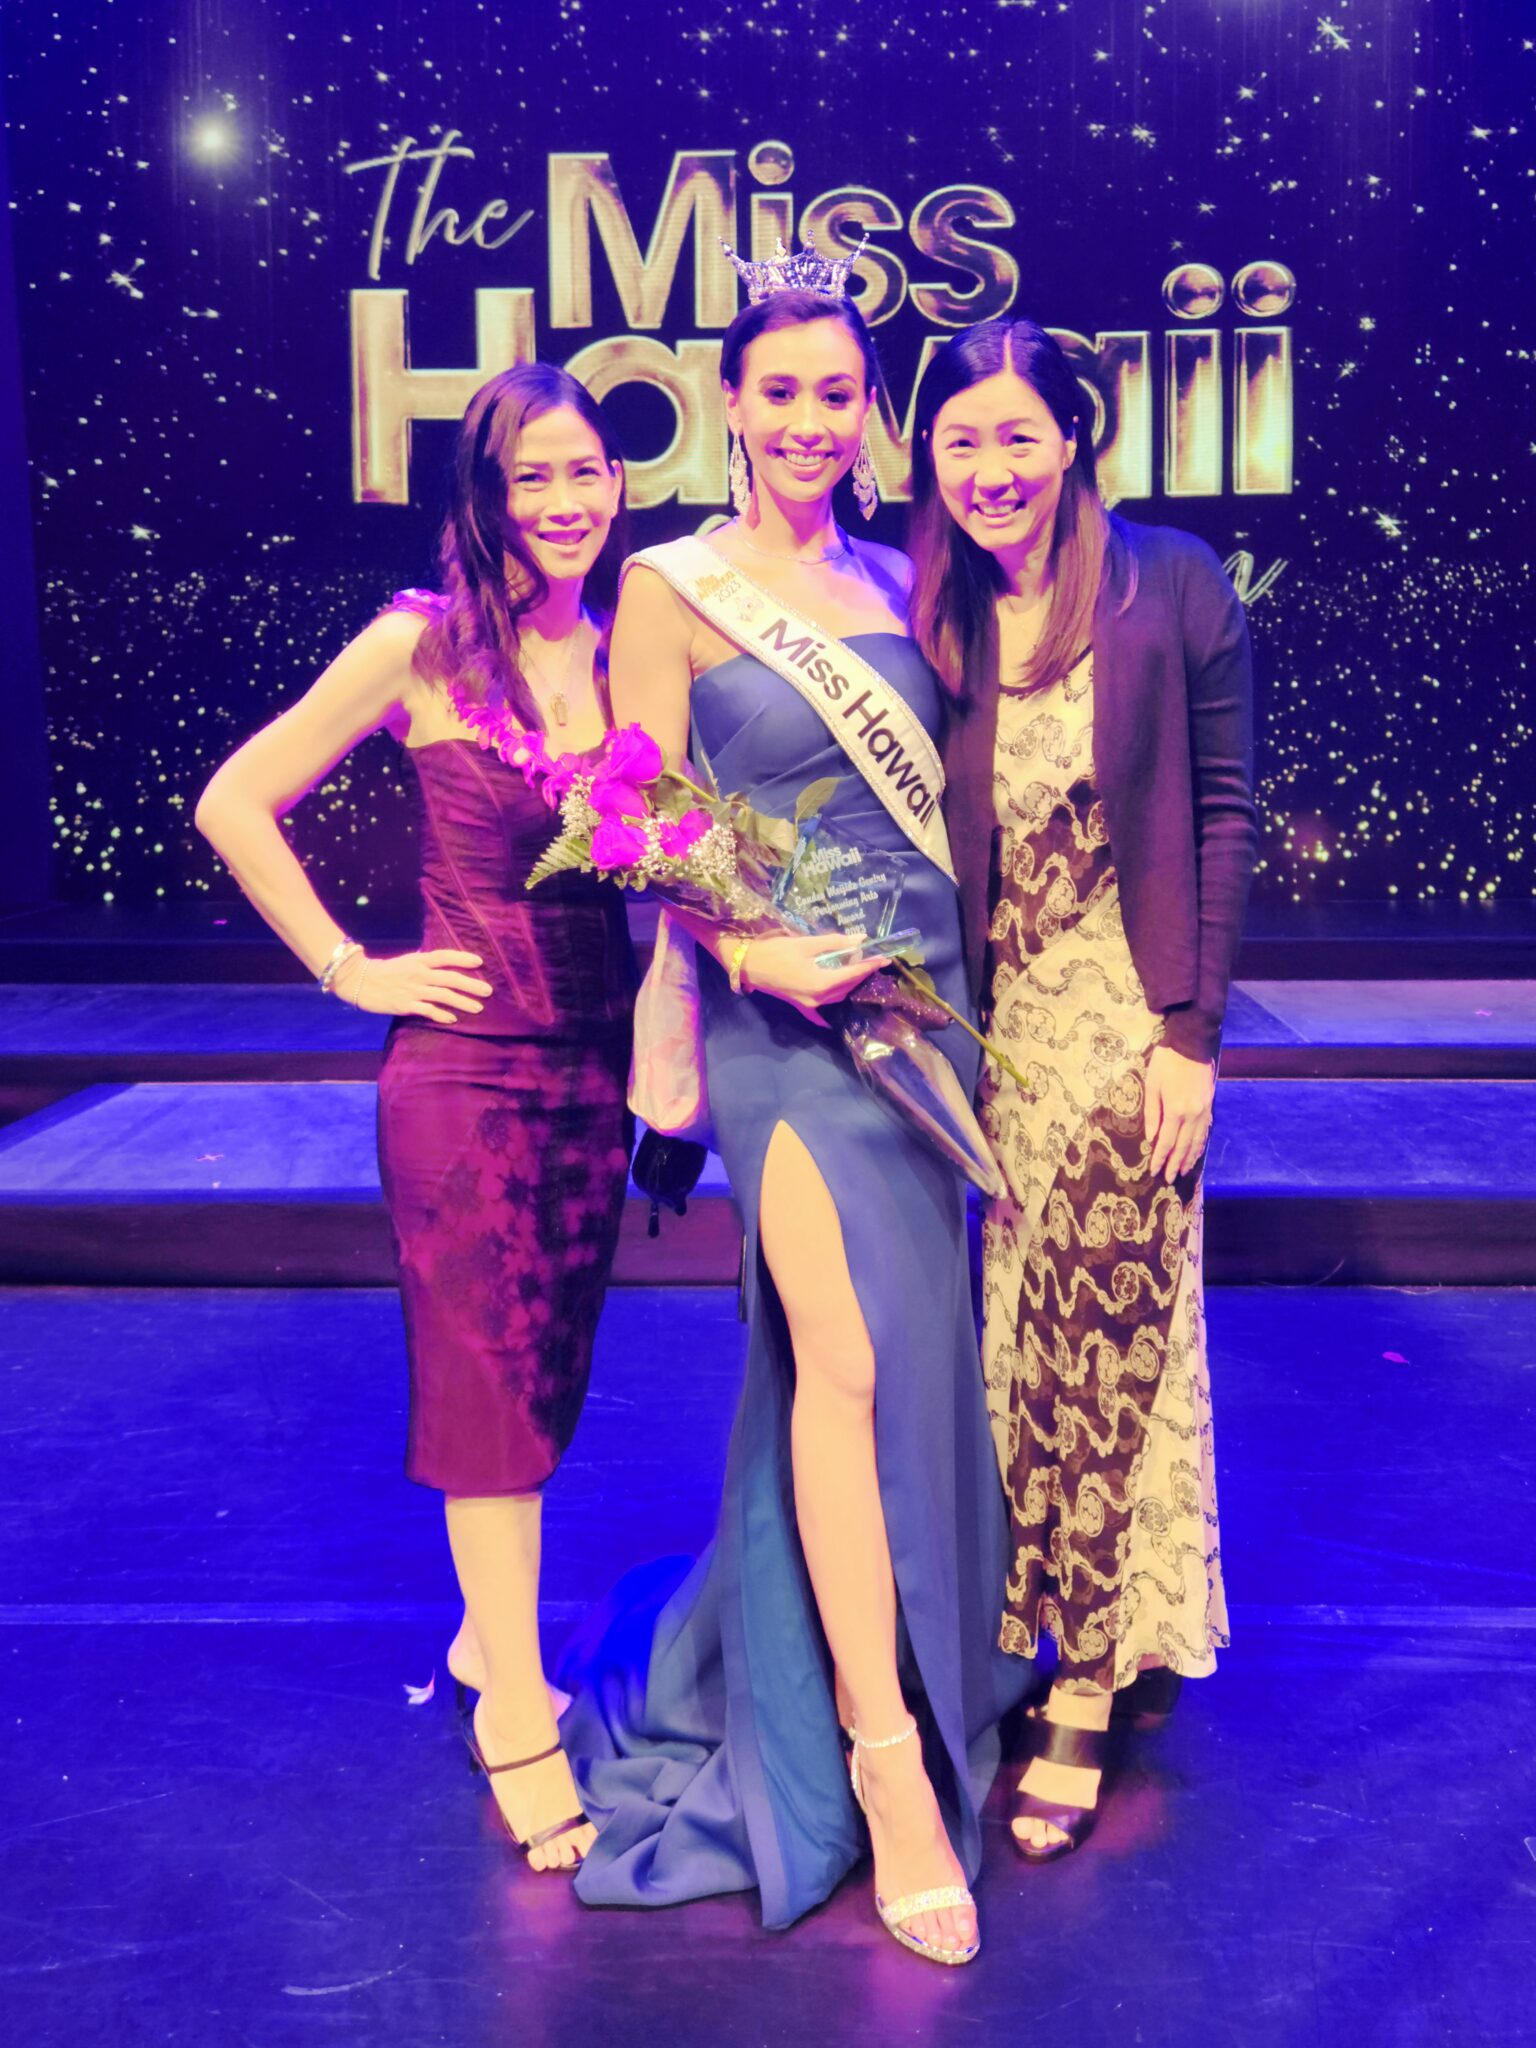 Congratulations Star DahlThurston, our 2023 Miss Chinatown Hawaii, who